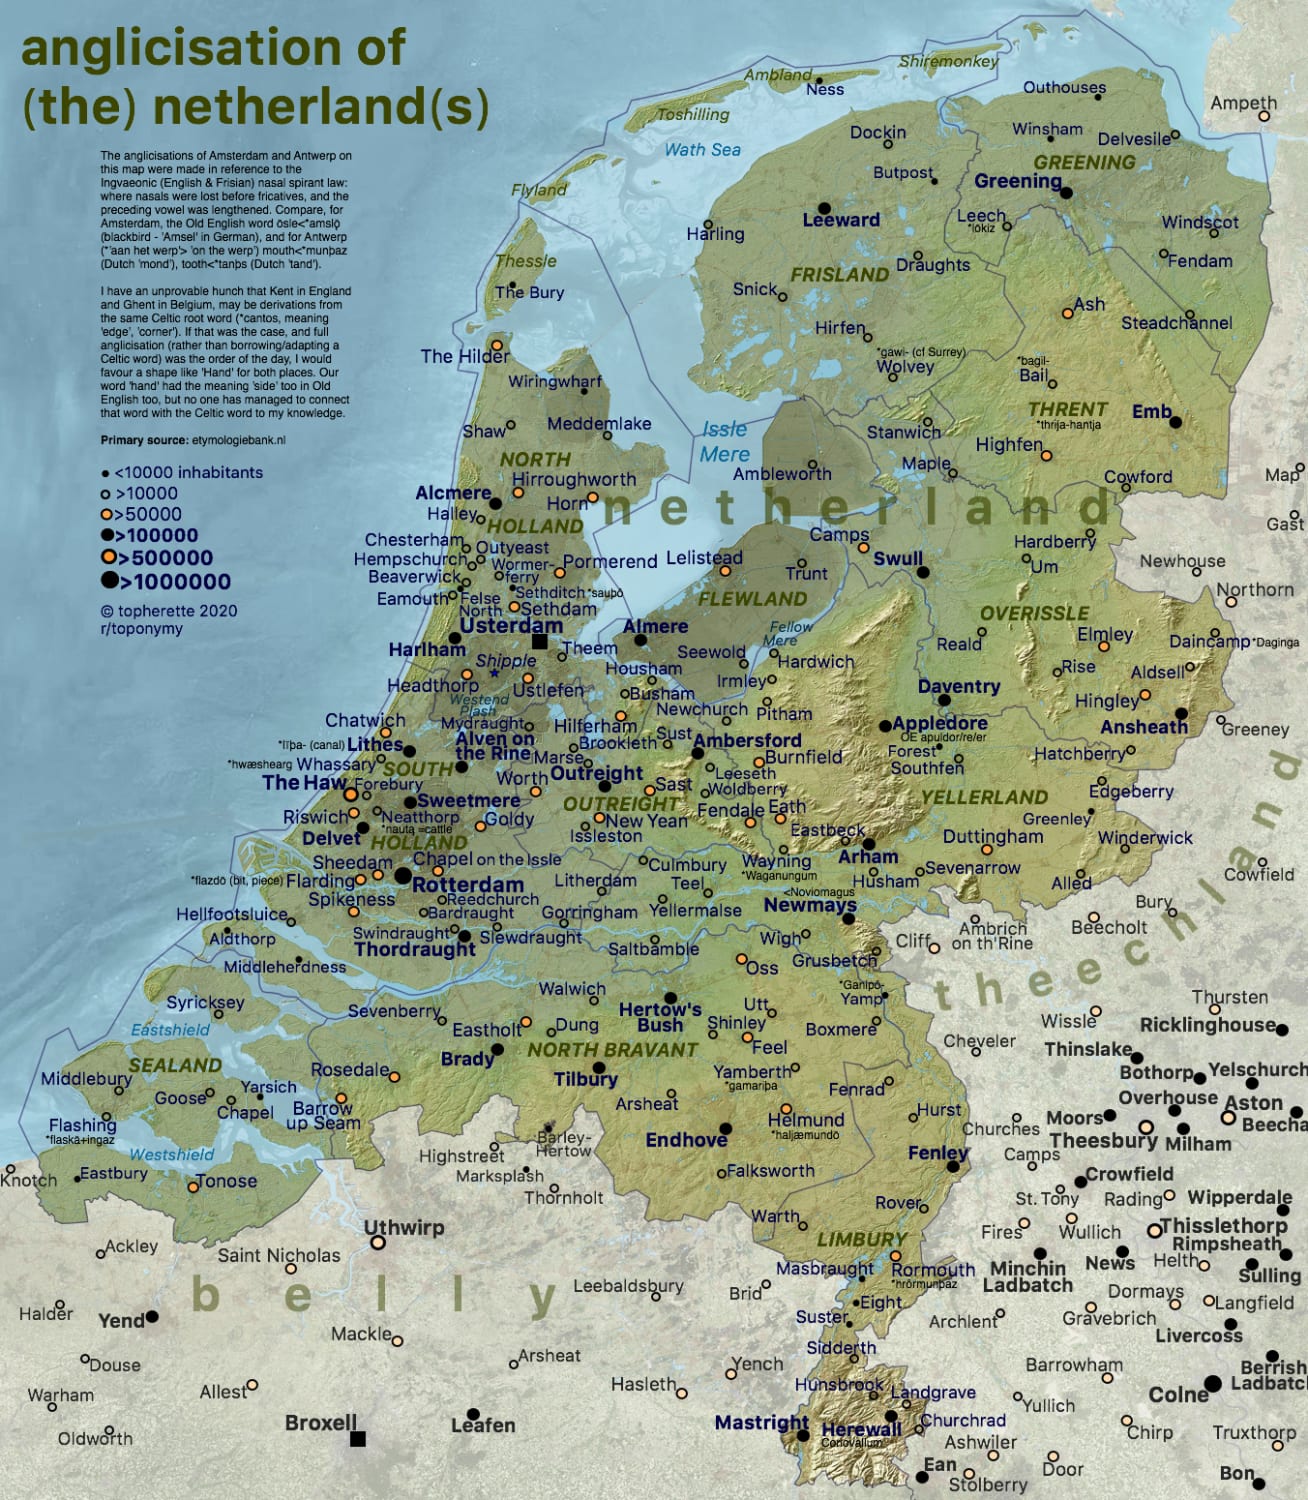 If the Germanic language spoken in the Netherlands had developed in the same way that English did